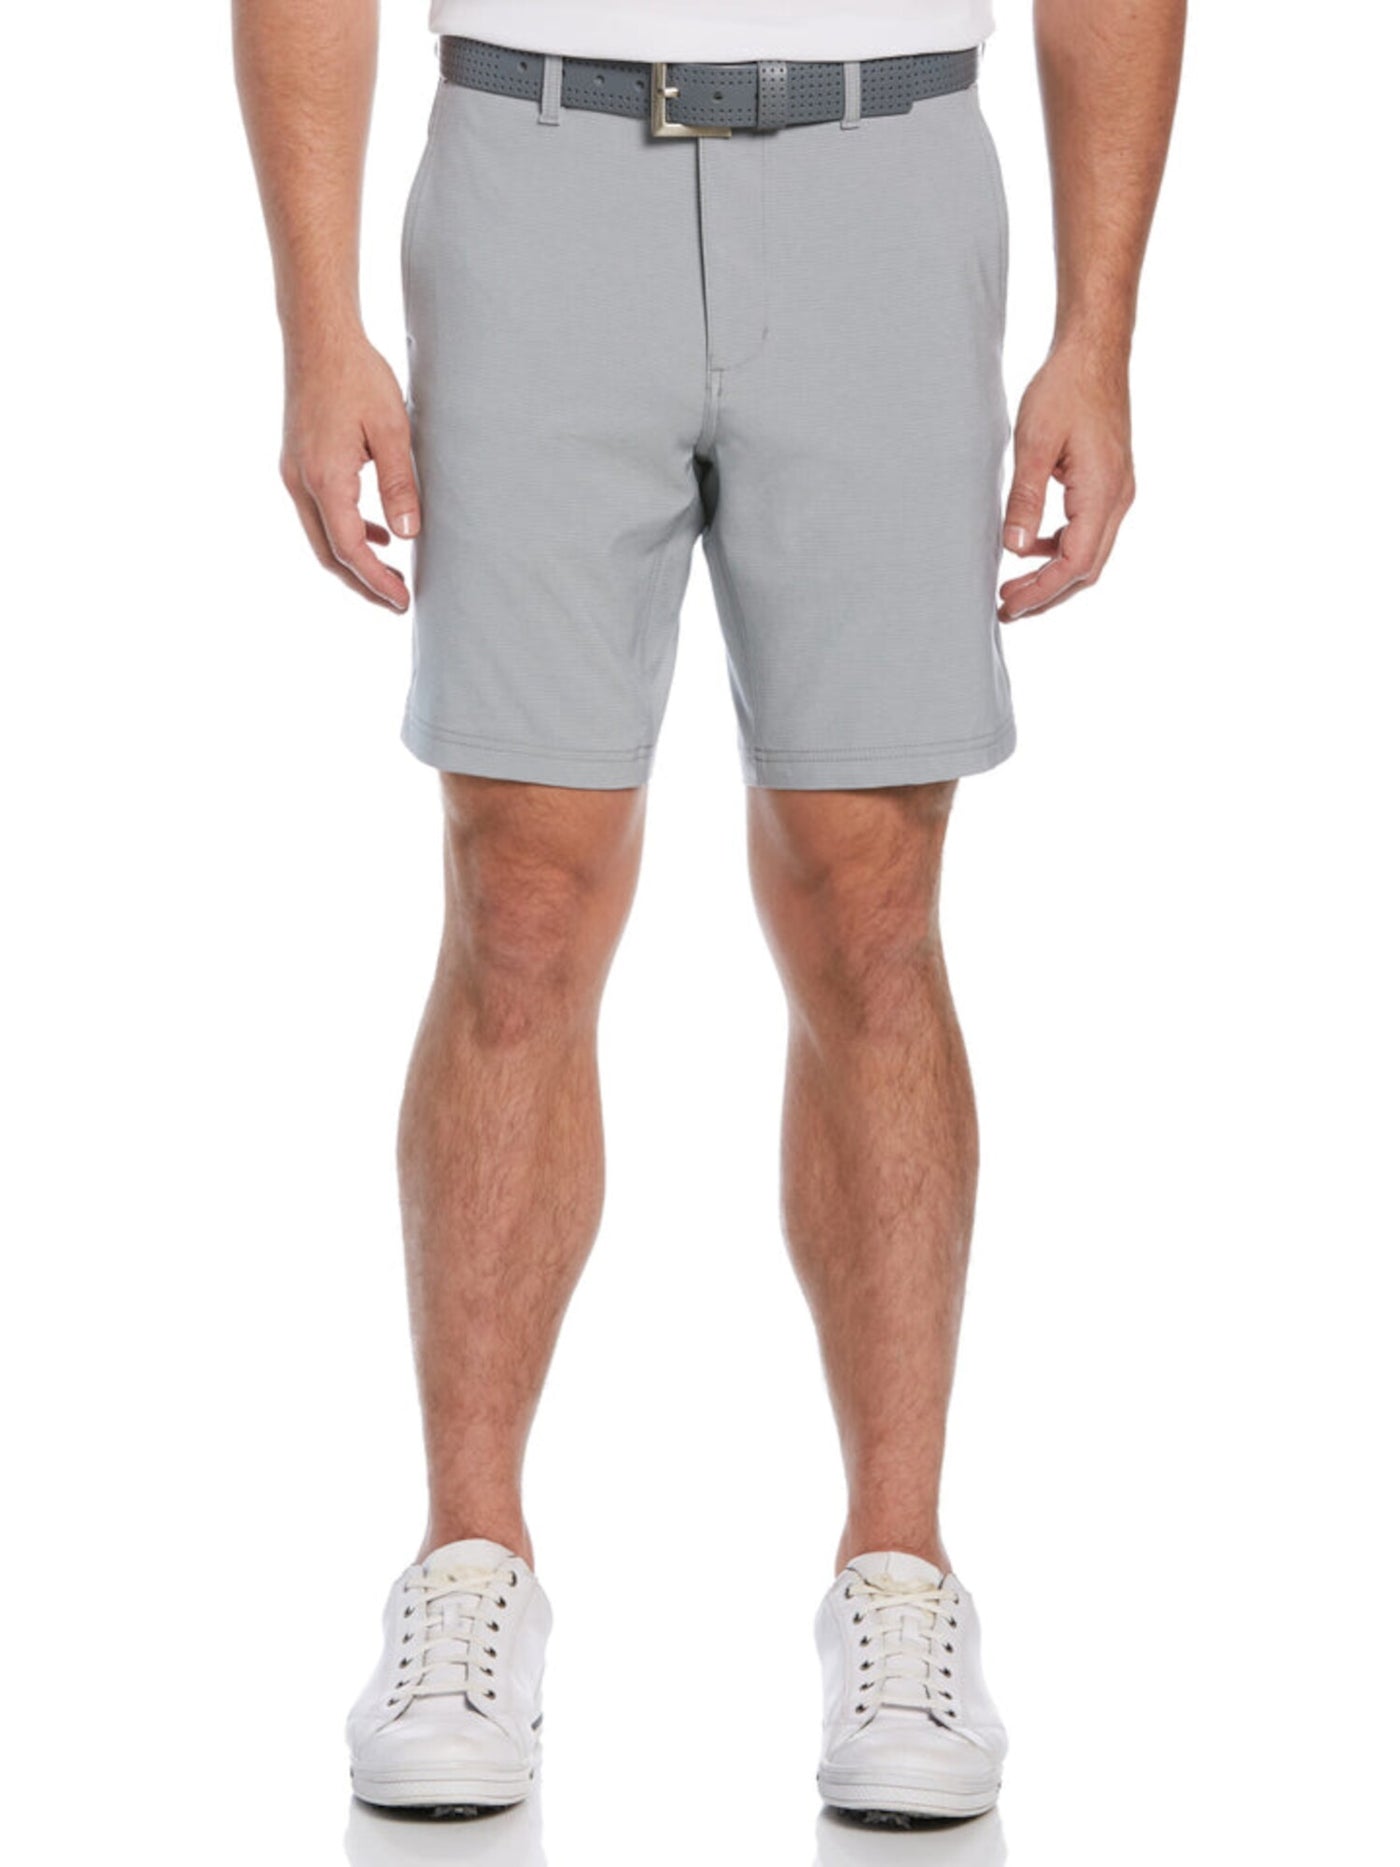 HYBRID APPAREL Mens Gray Athletic Fit Performance Stretch Athletic Shorts 40 Waist